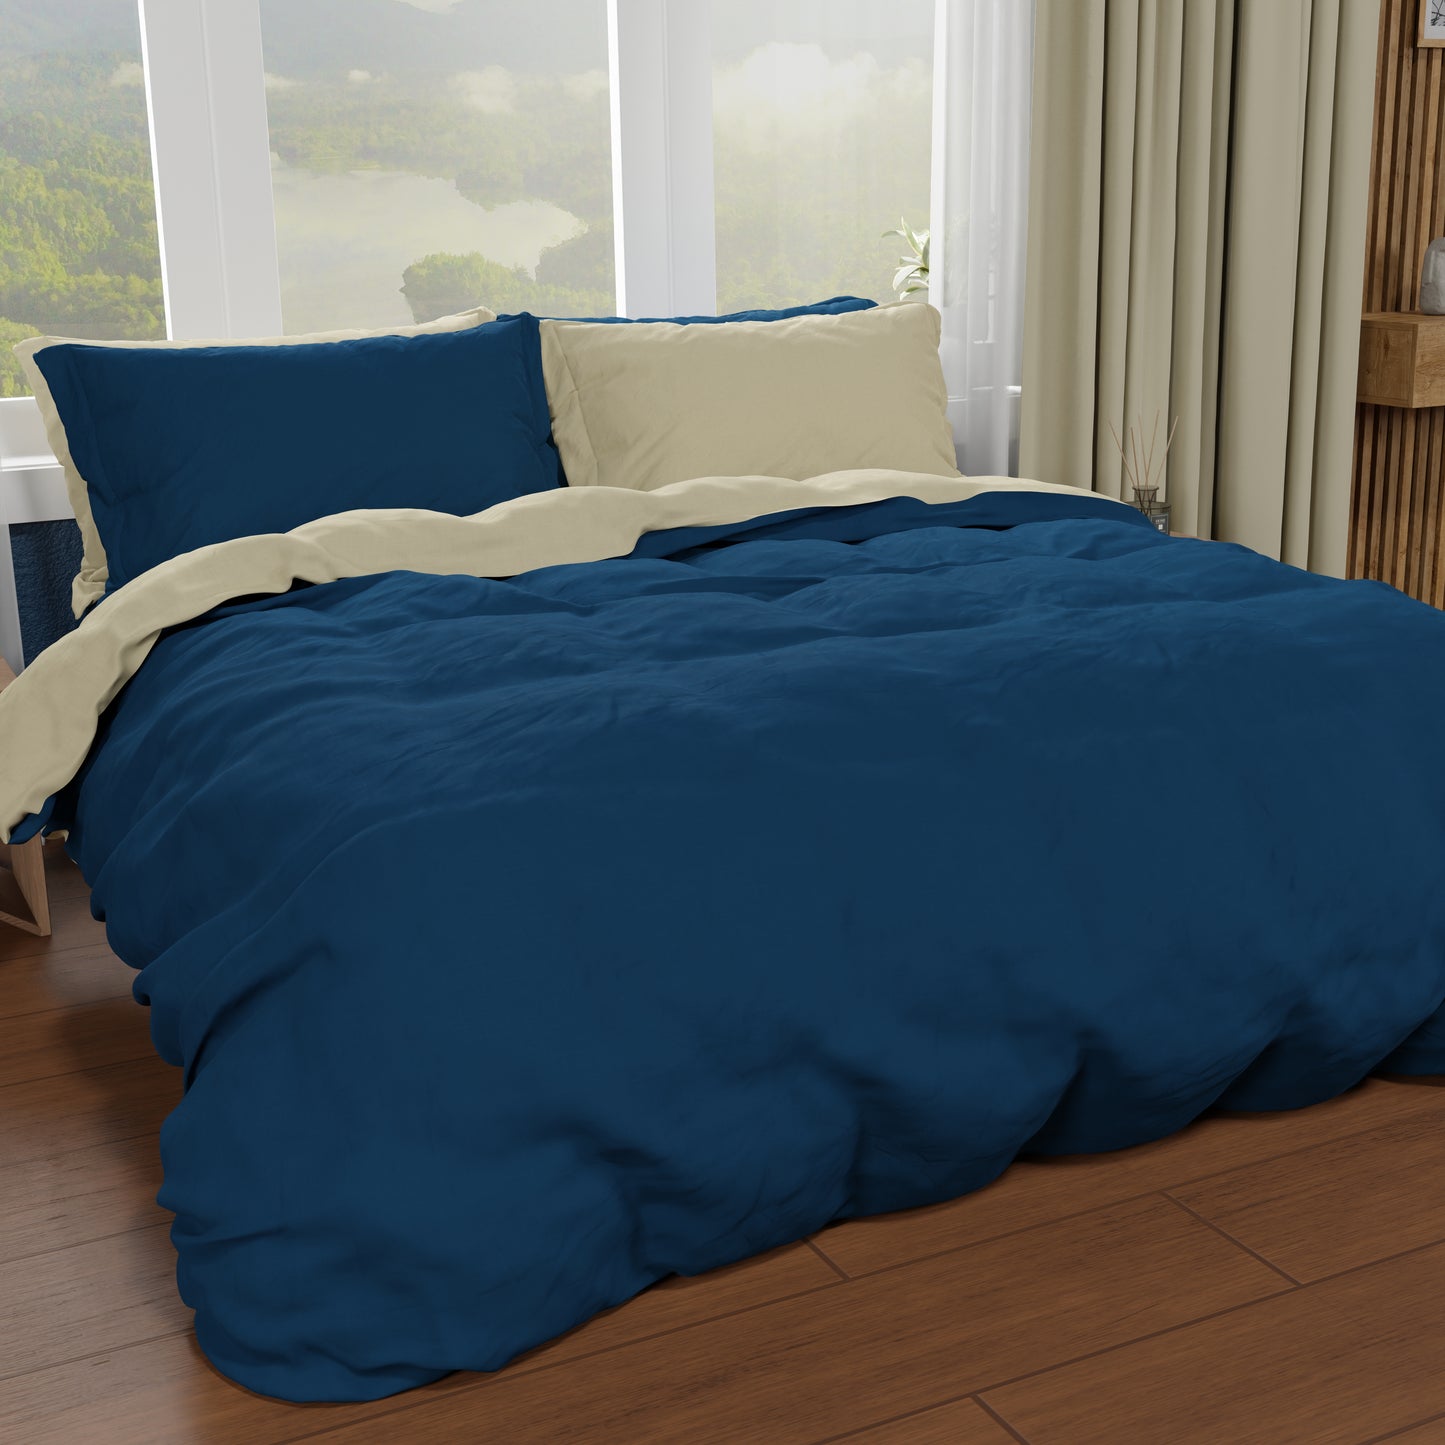 Double Duvet Cover, Duvet Cover and Pillowcases, Midnight Blue/Taupe